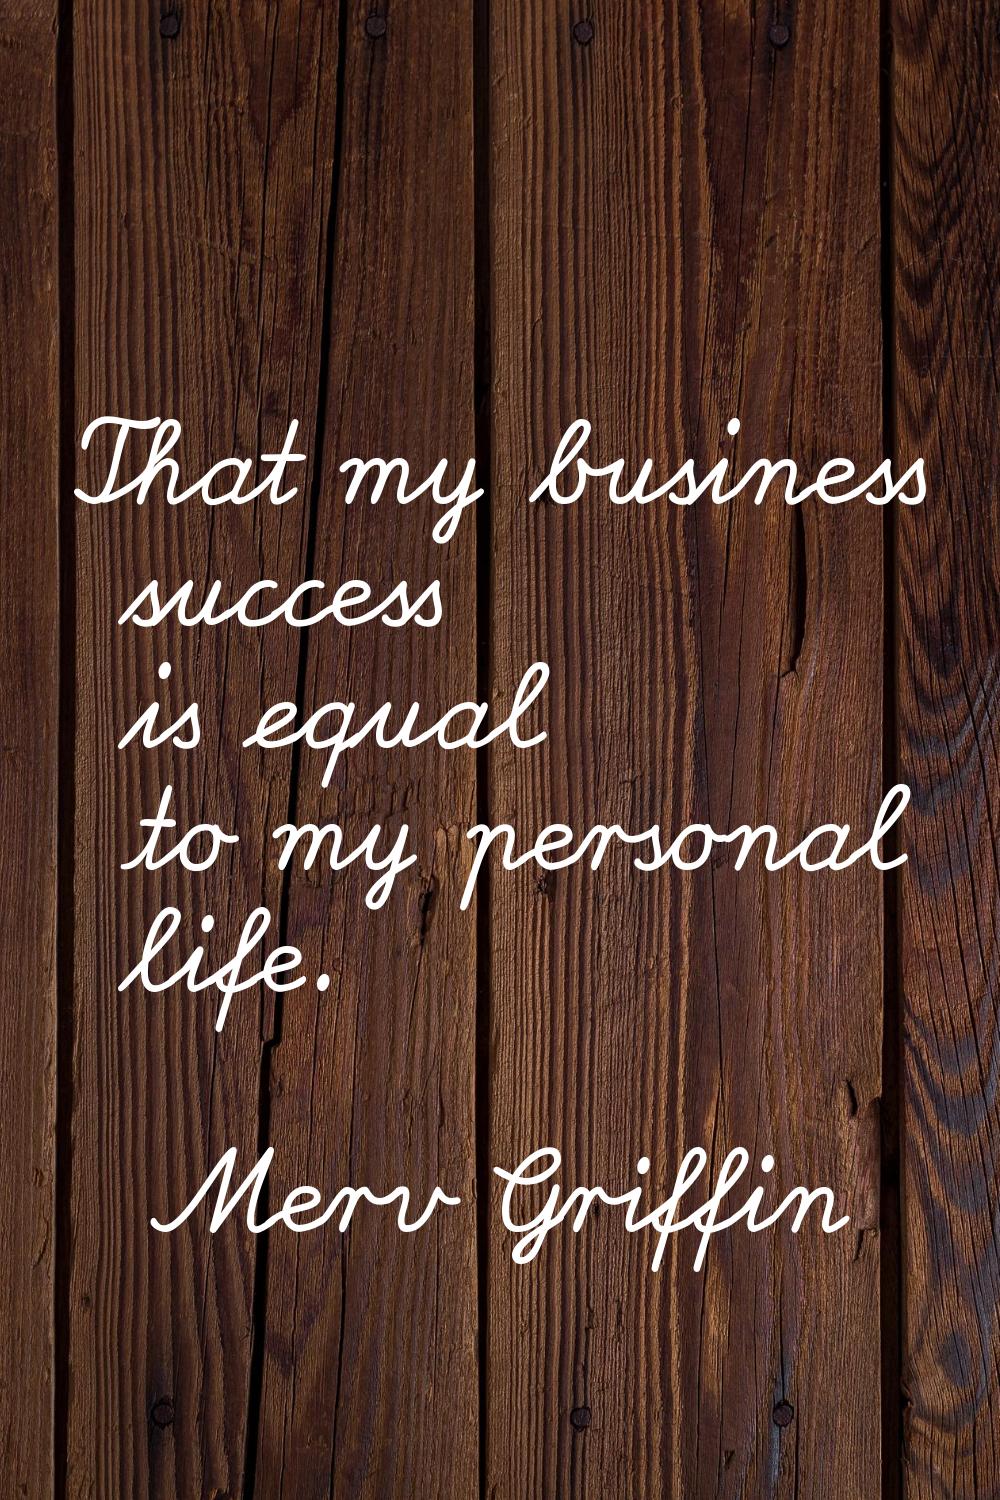 That my business success is equal to my personal life.